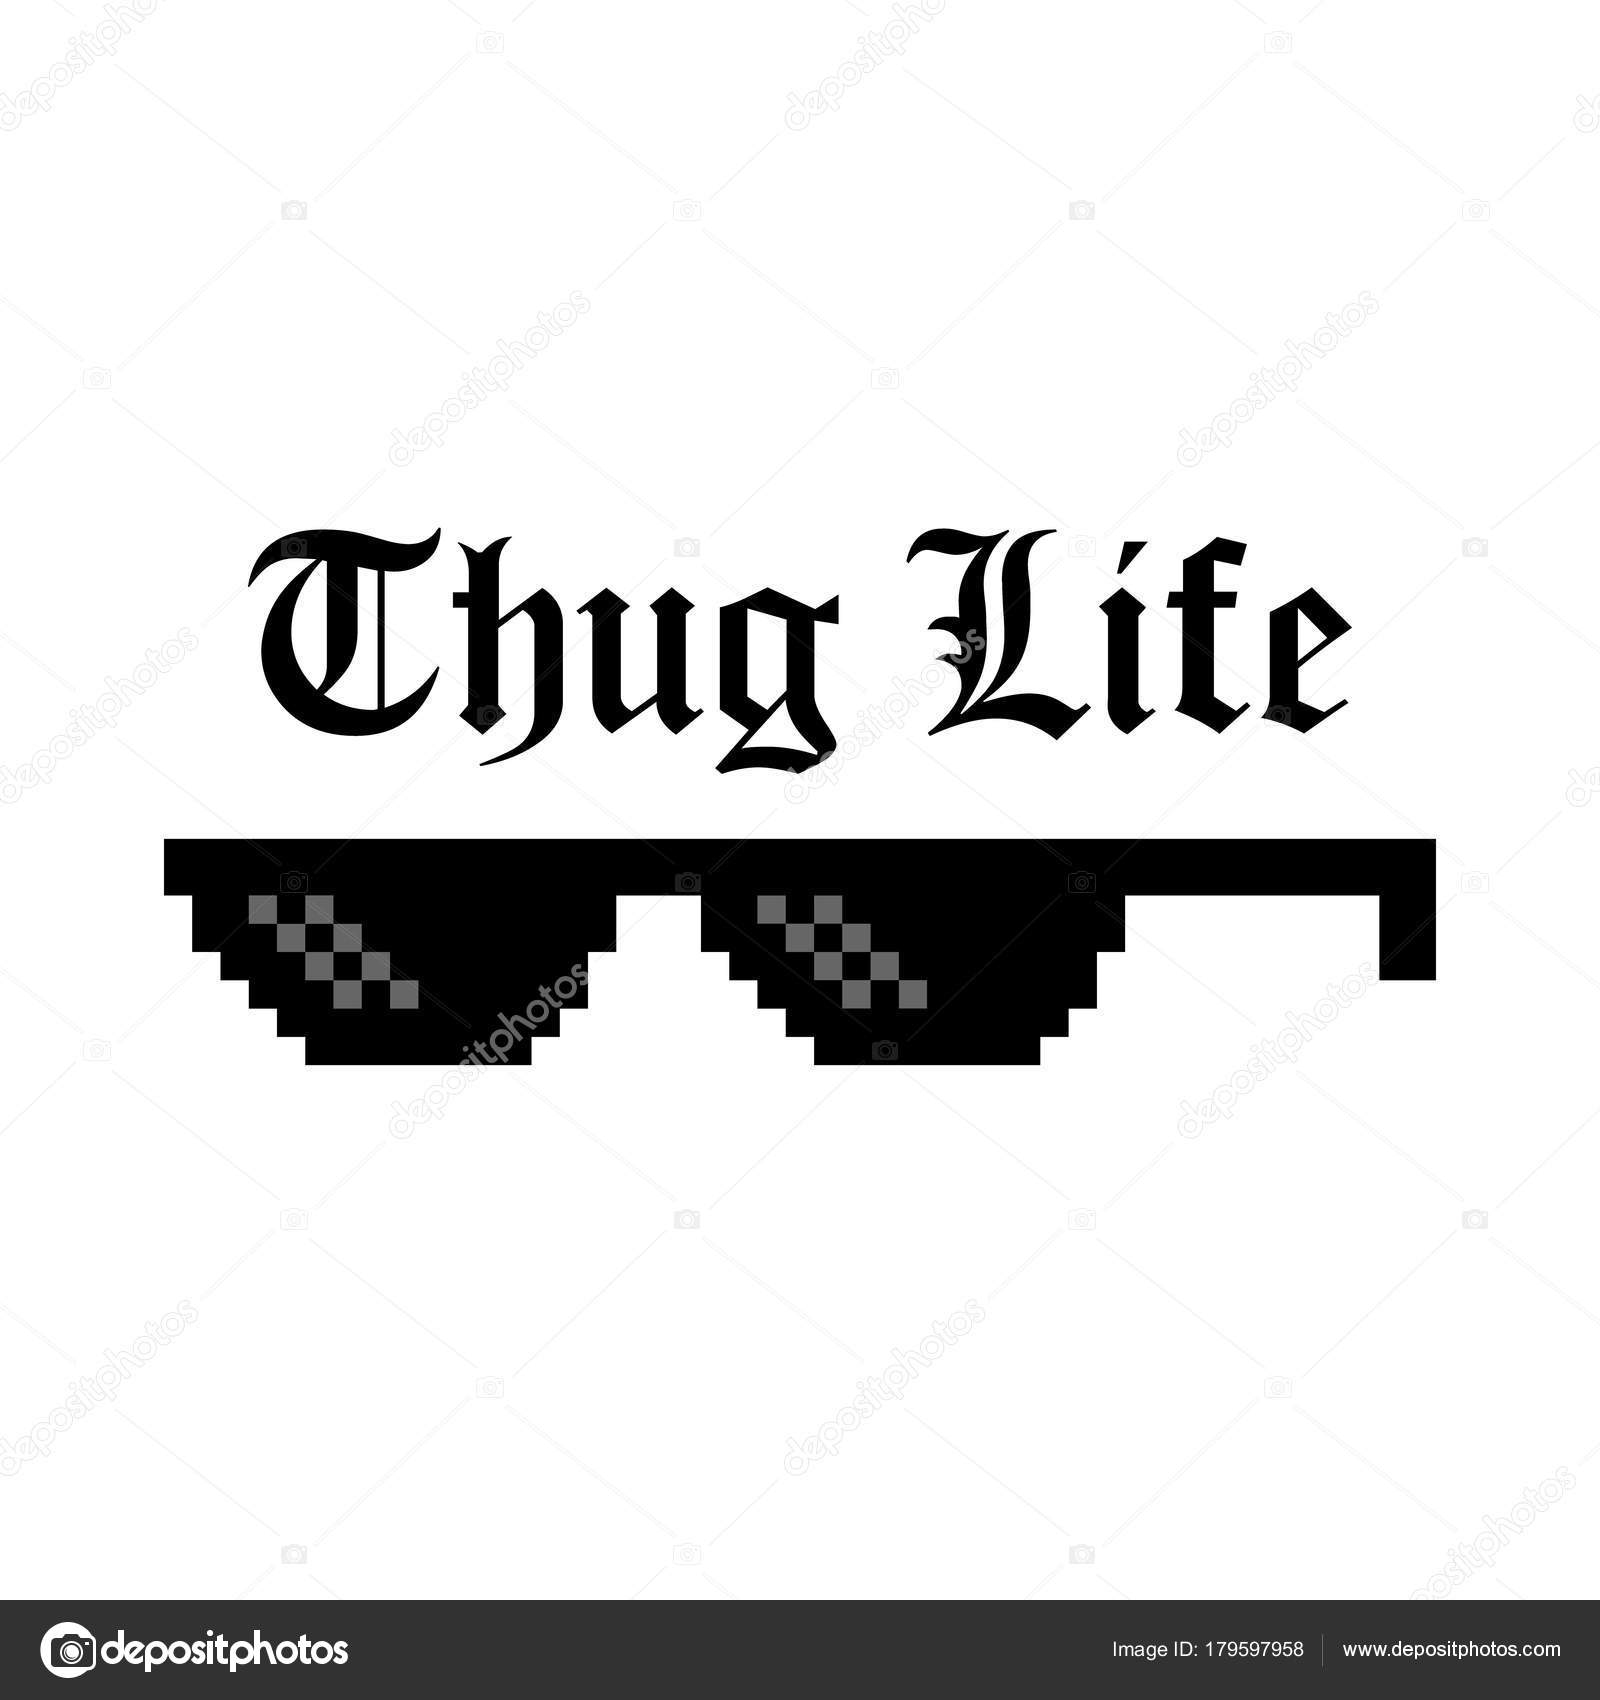 Creative vector illustration of pixel glasses of thug life ...